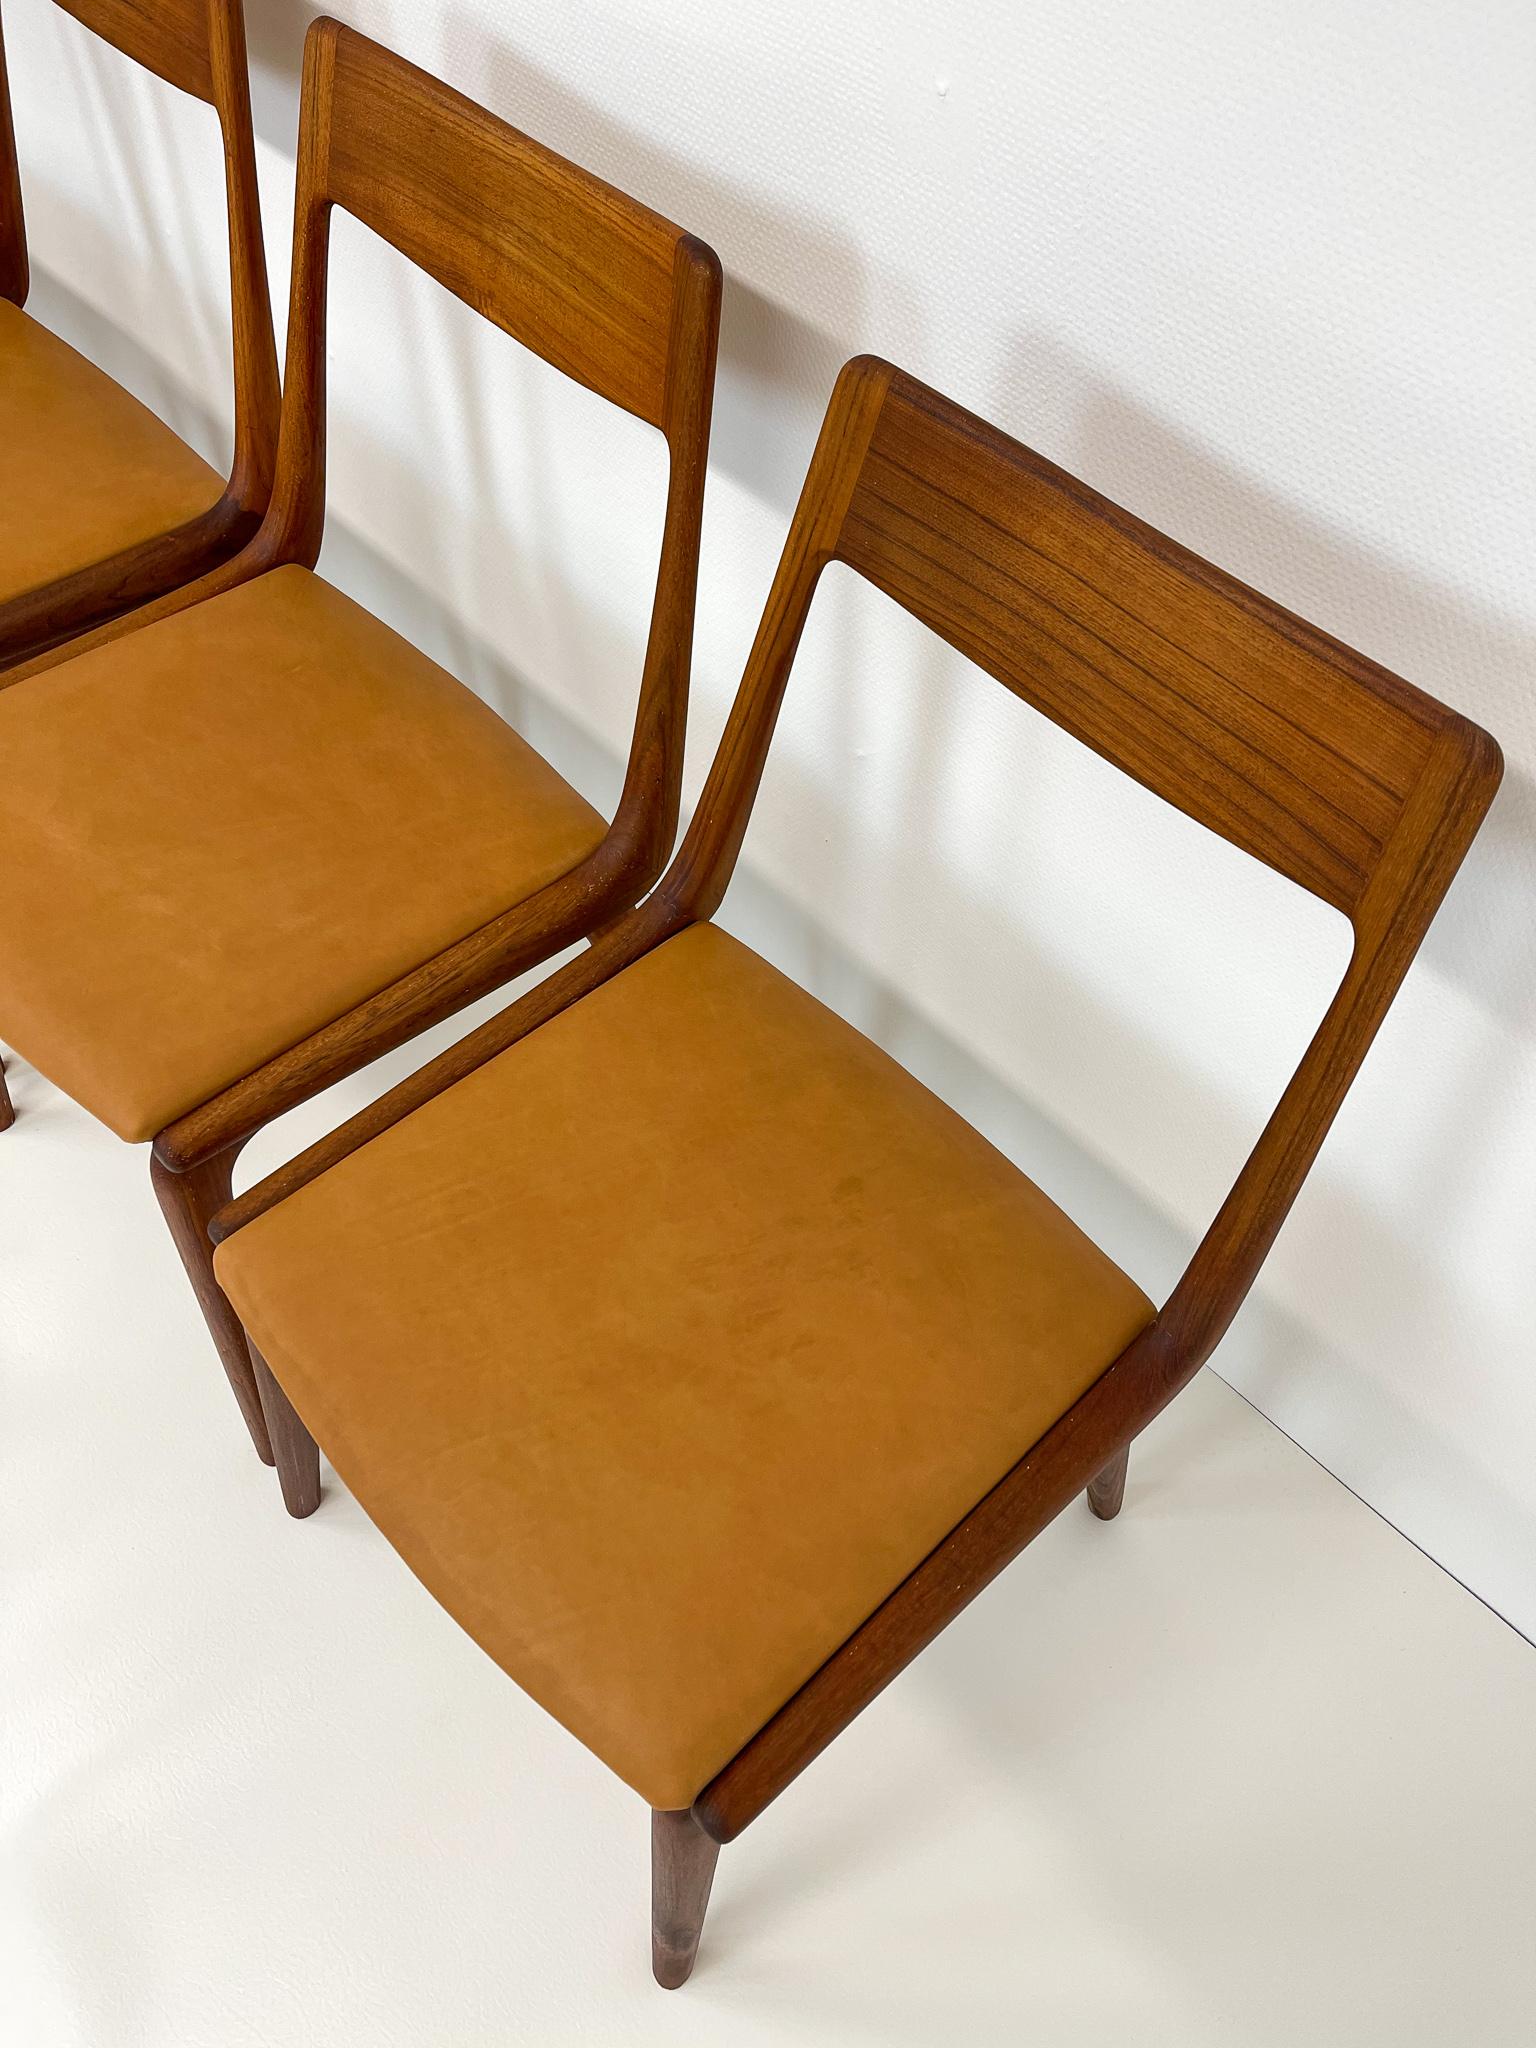 Midcentury Alfred Christiansen Teak and Leather 'Boomerang' Chairs 9